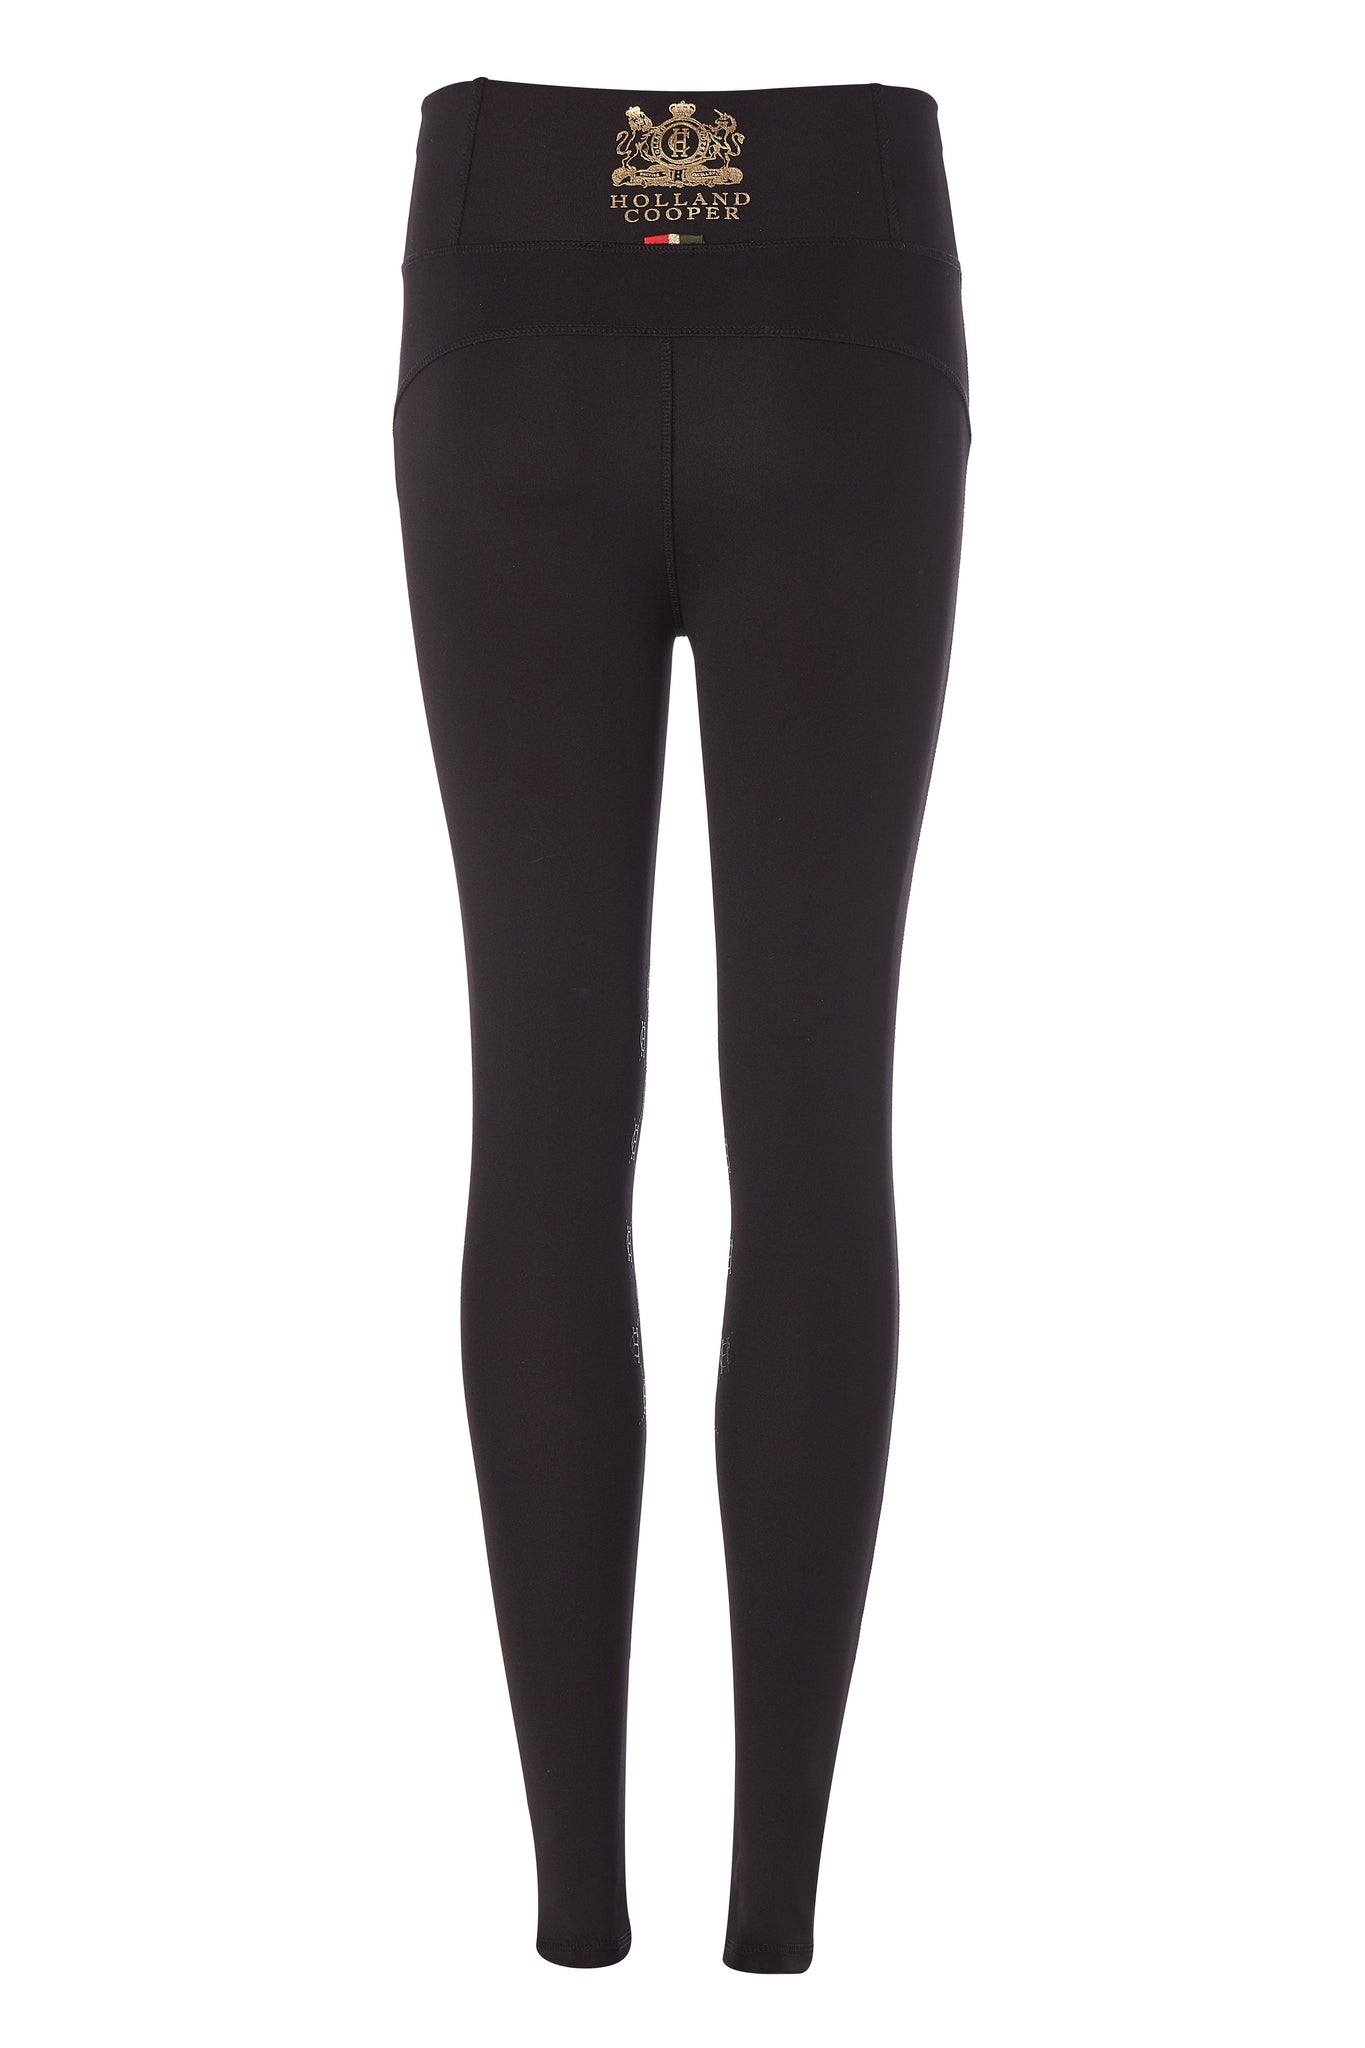 Holland Cooper Thermal Ladies Full Grip Riding Tights - Black